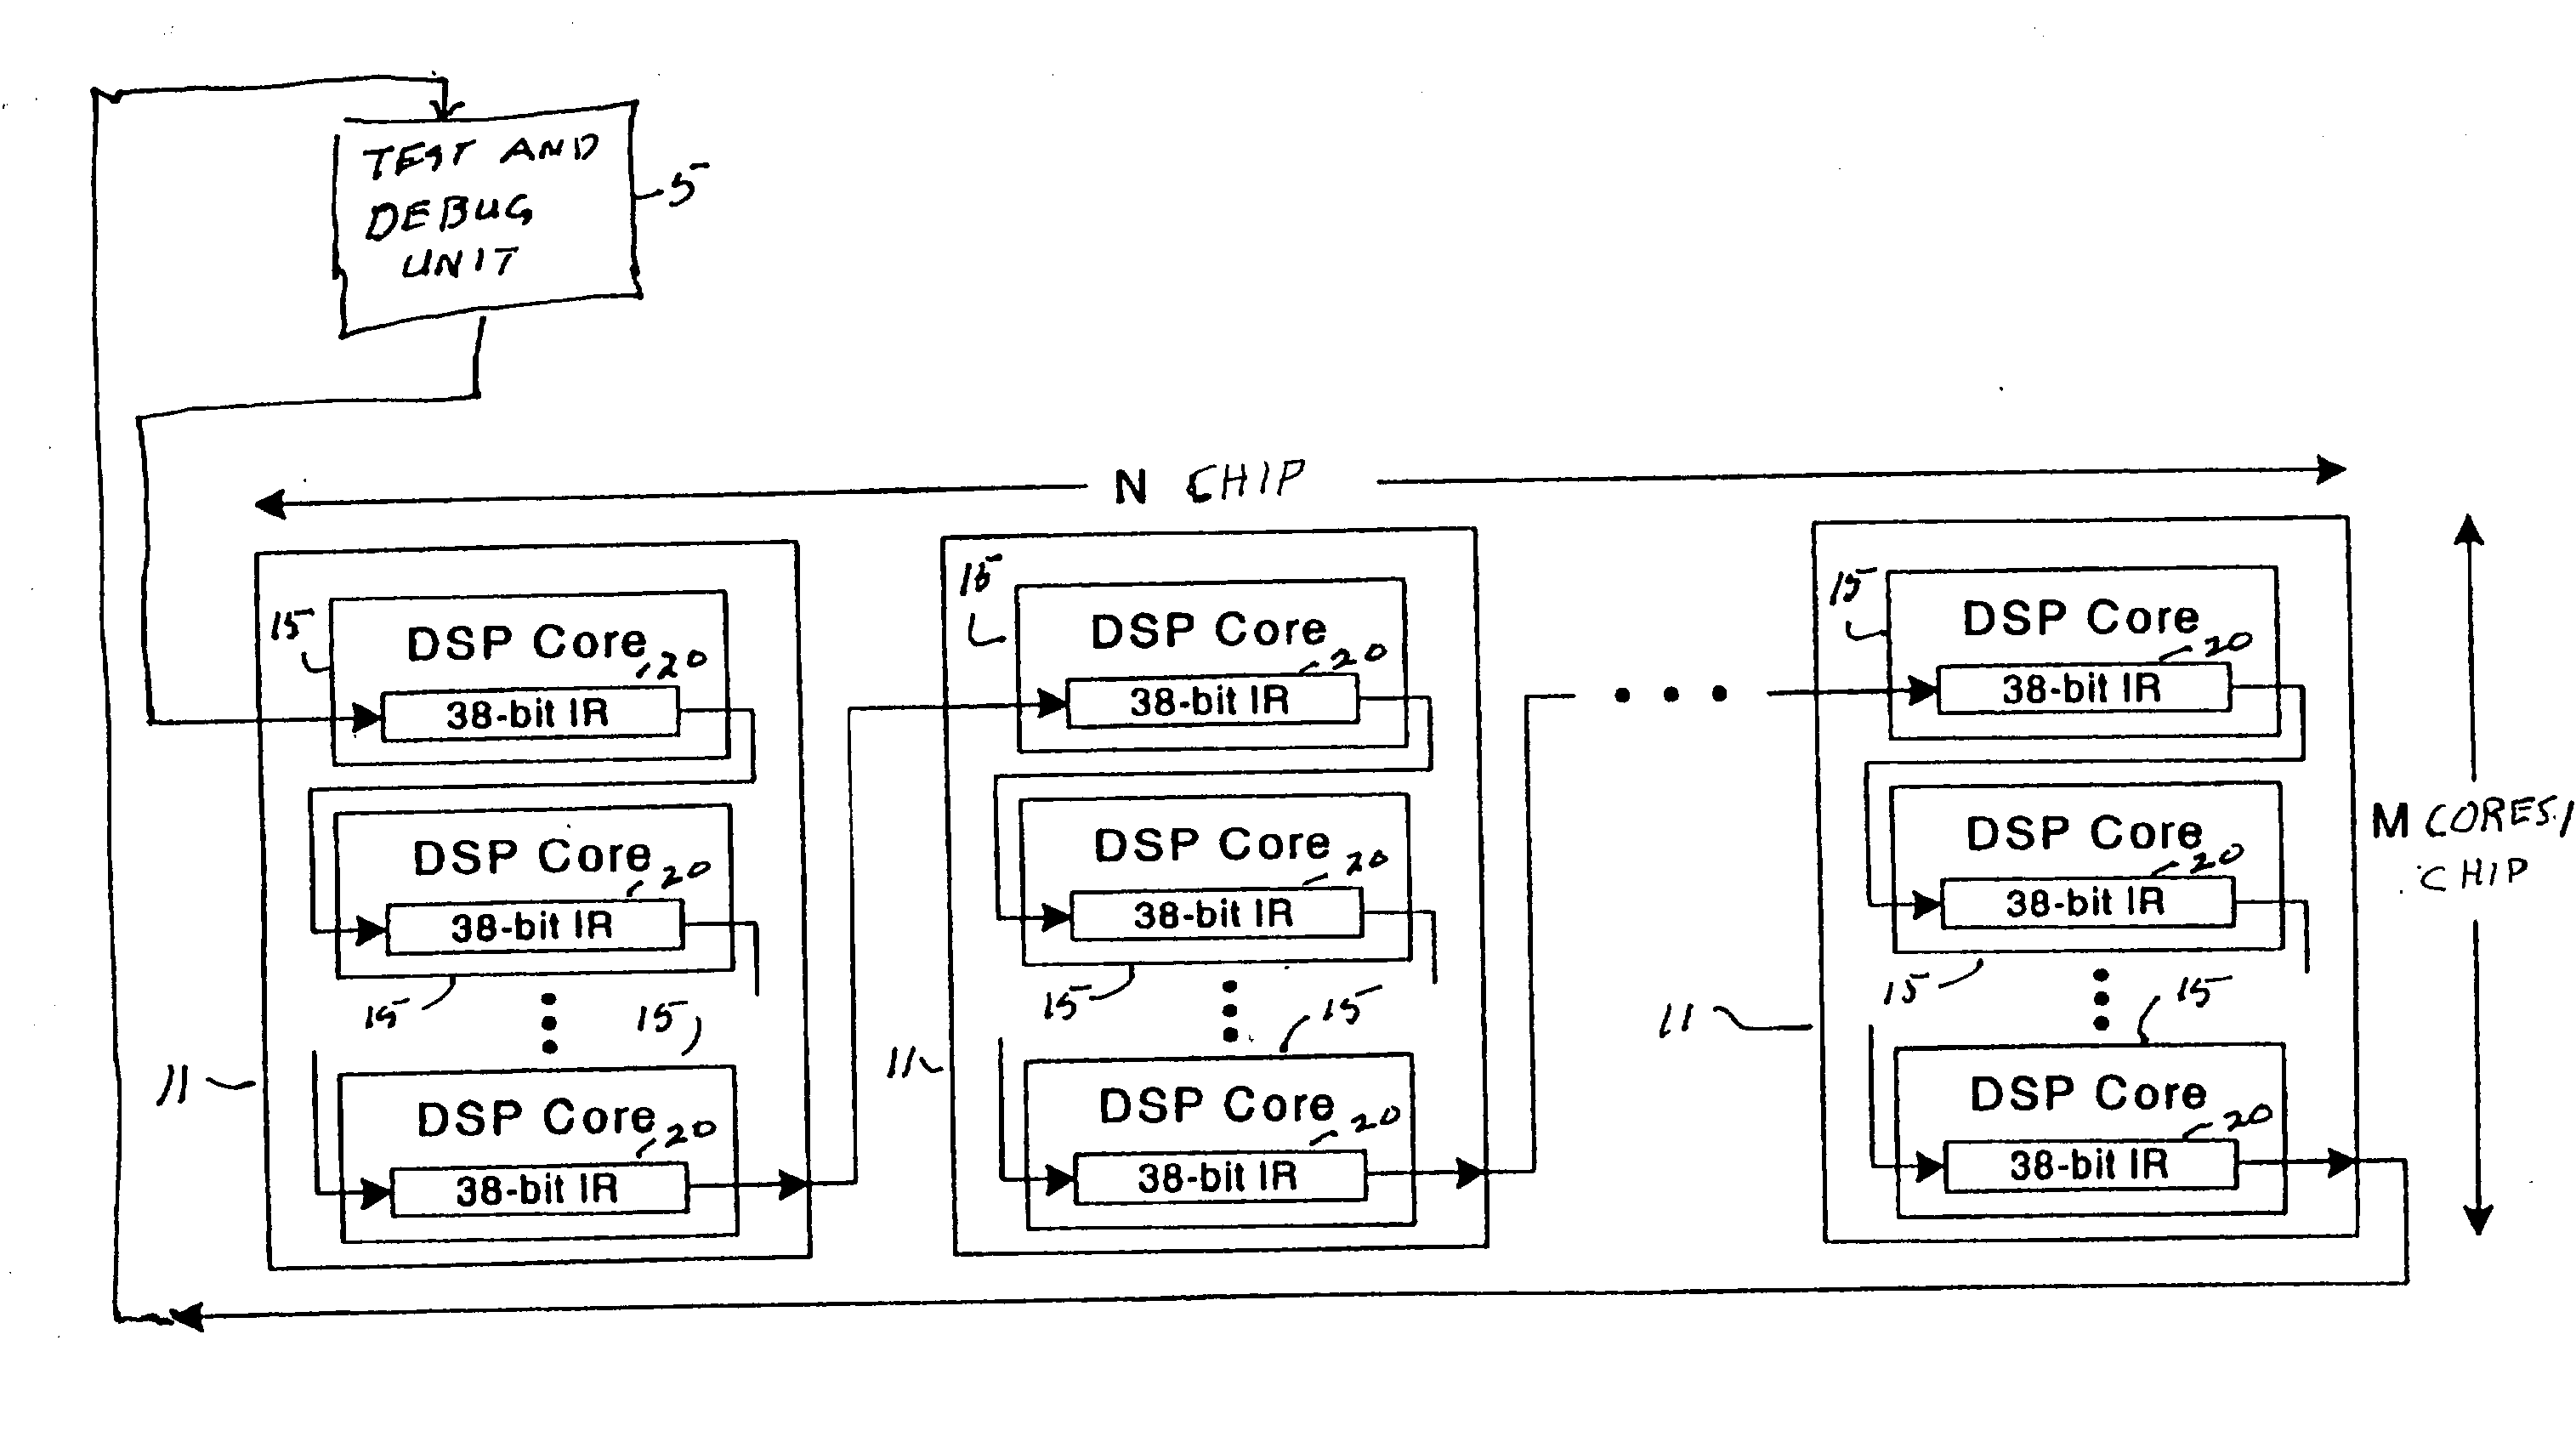 Apparatus and method for device selective scans in data streaming test environment for a processing unit having multiple cores